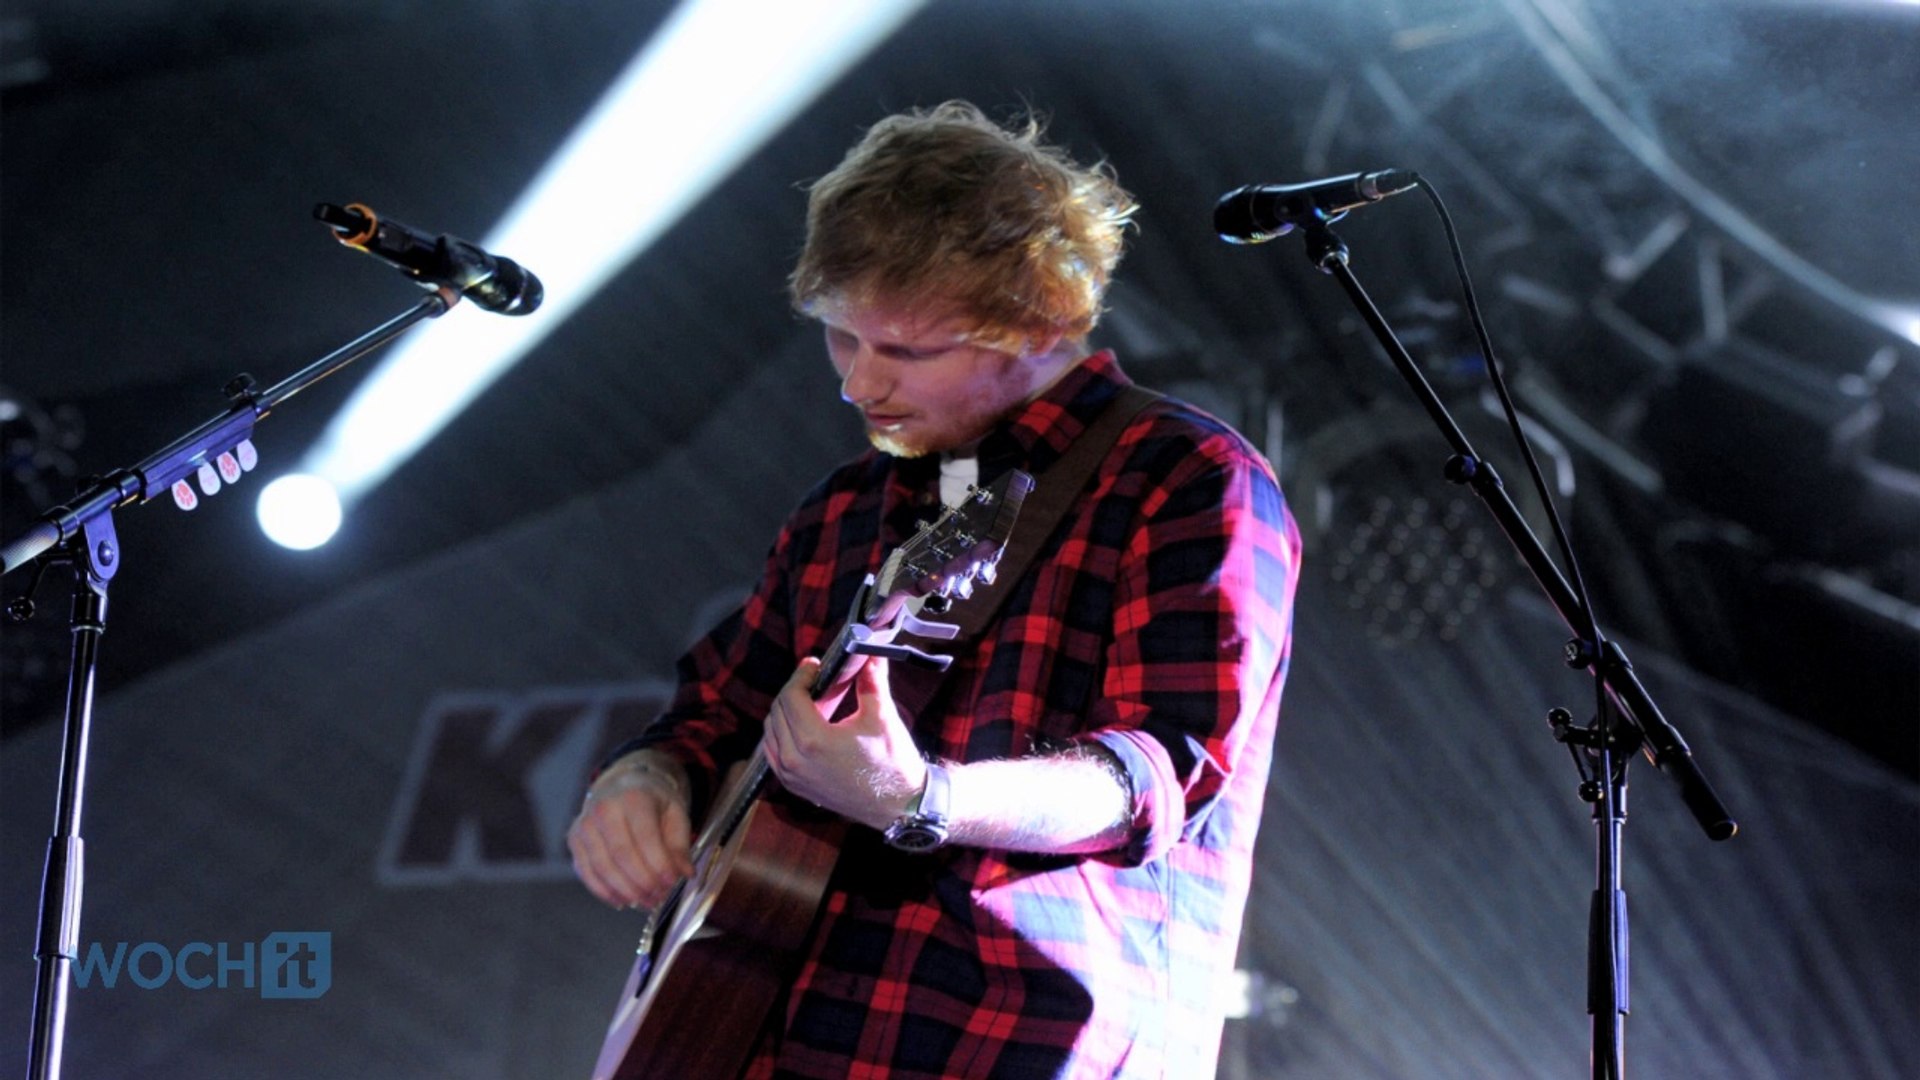 Ed Sheeran Has A Girlfriend! Find Out Why He Won't Serenade Her